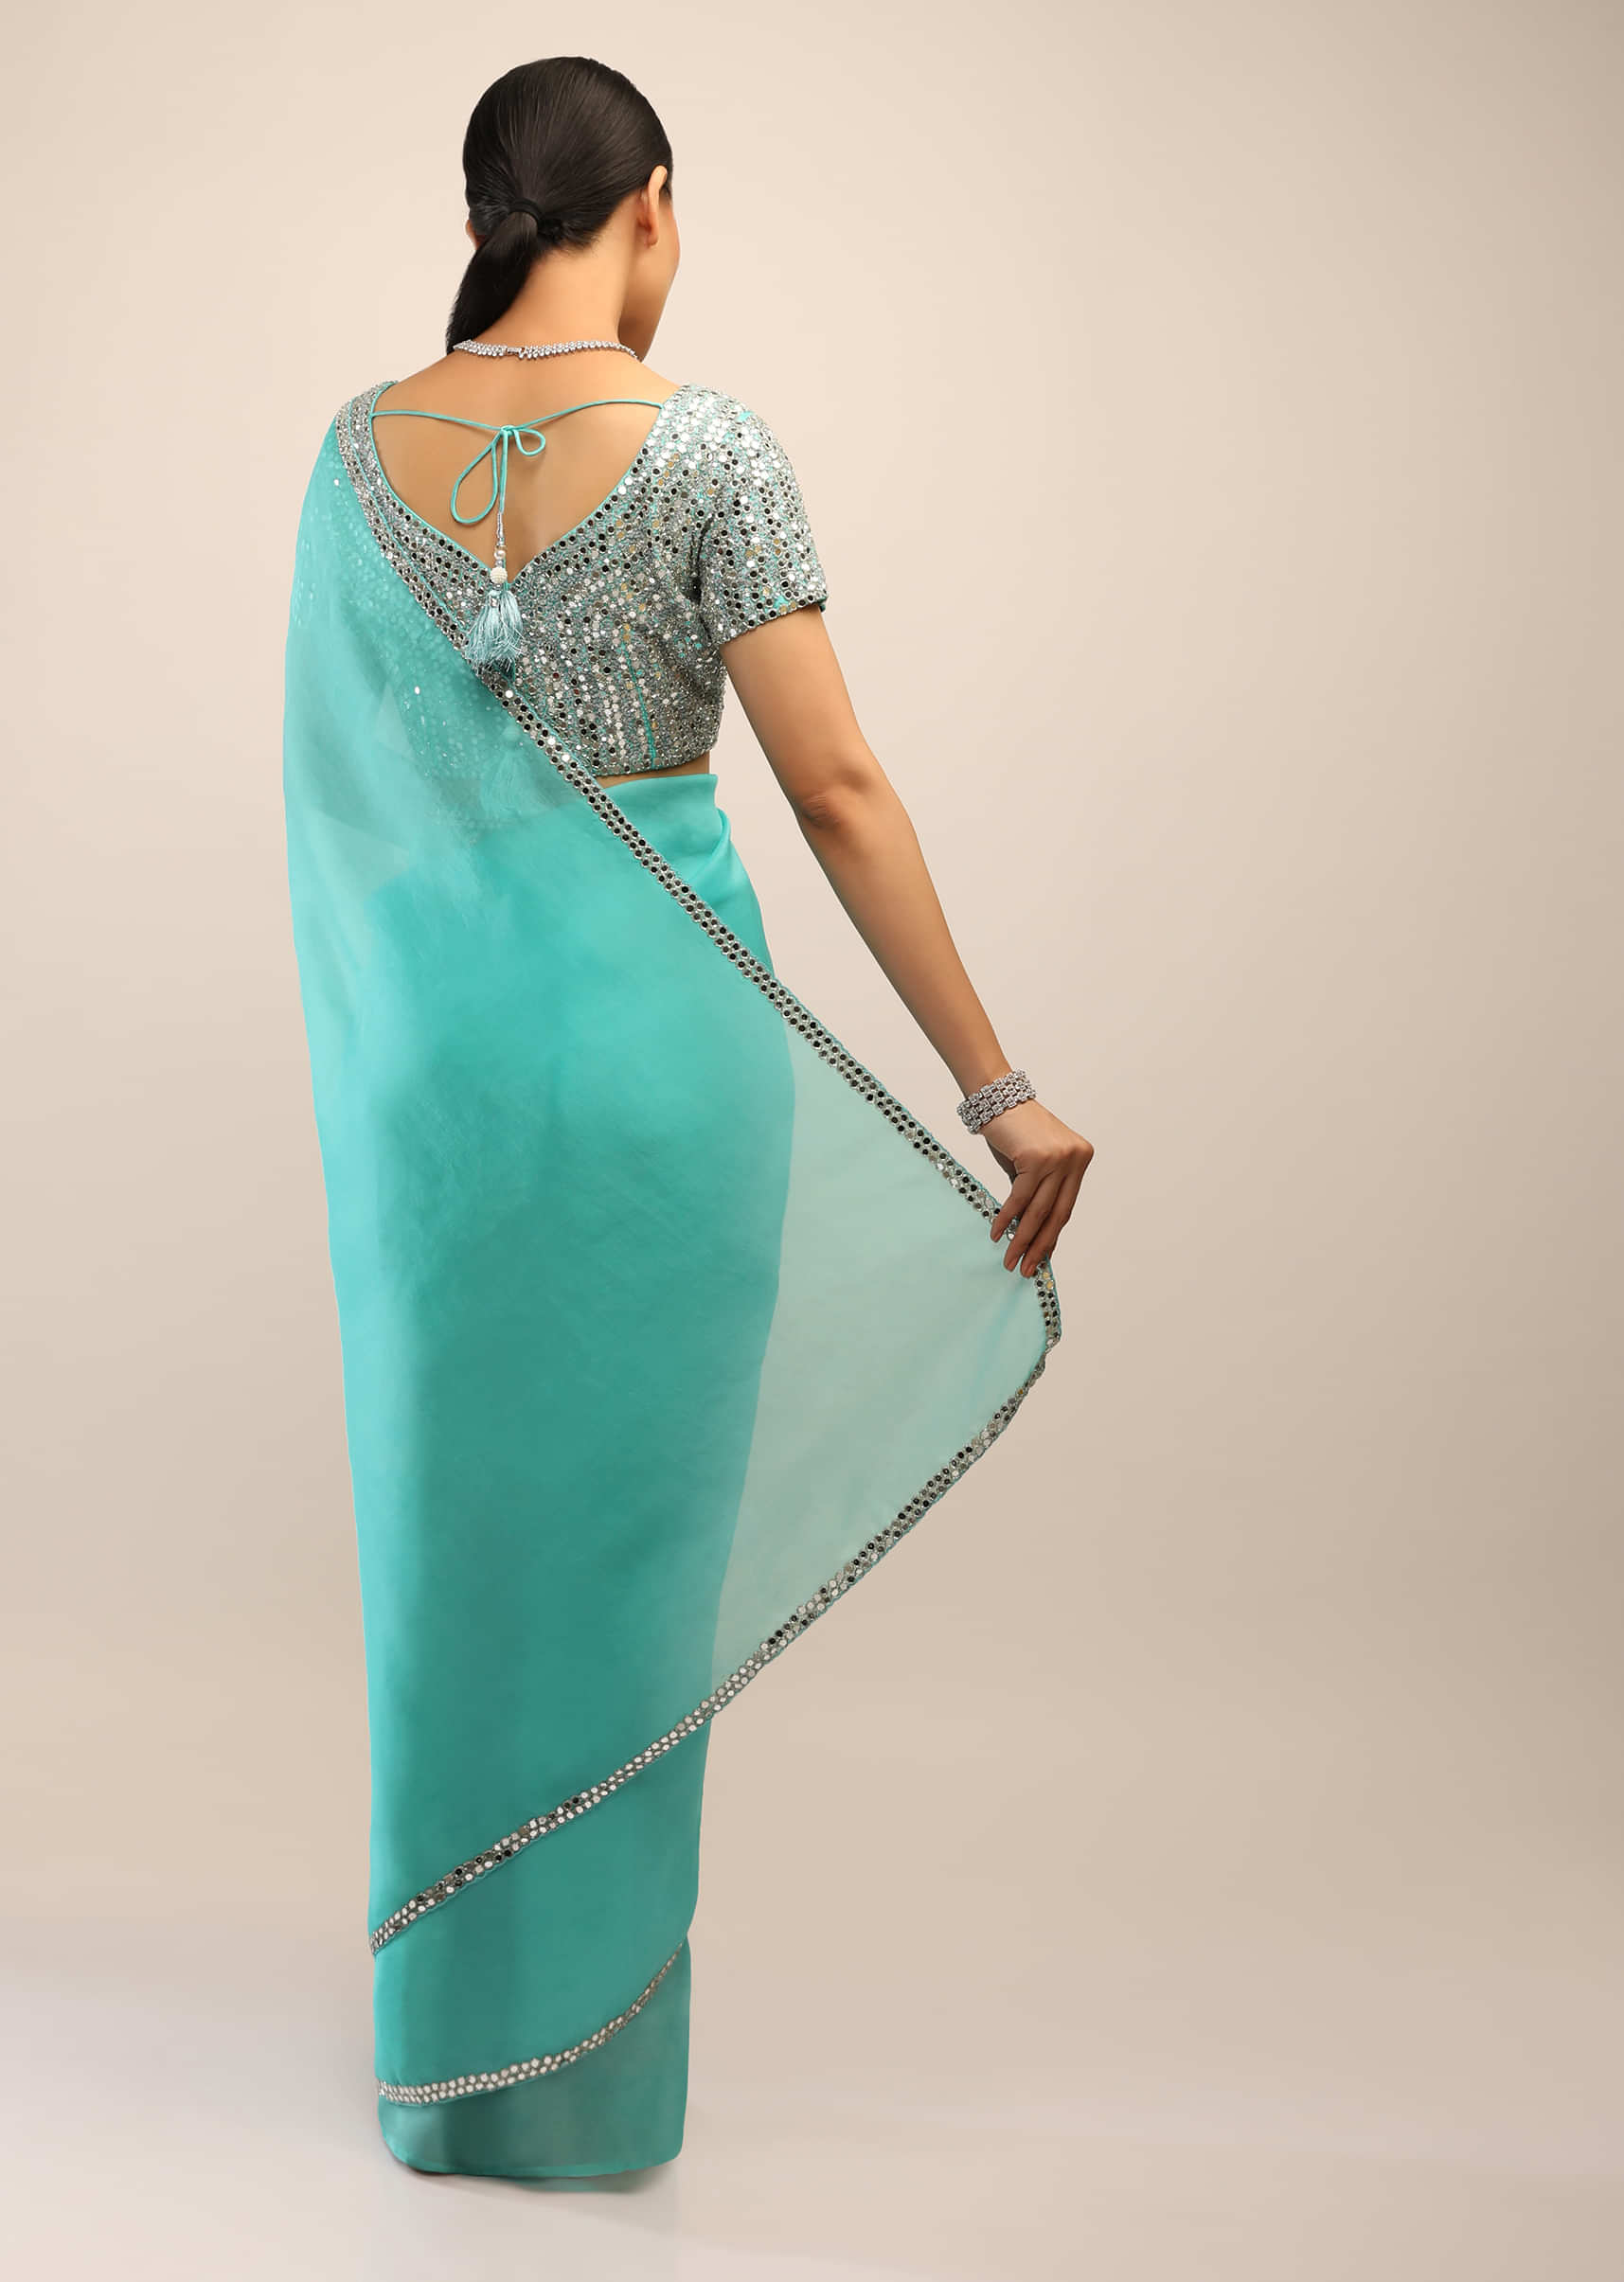 Ceramic Blue Saree In Organza With Mirror And Cut Dana Embroidery On The Border And Unstitched Blouse